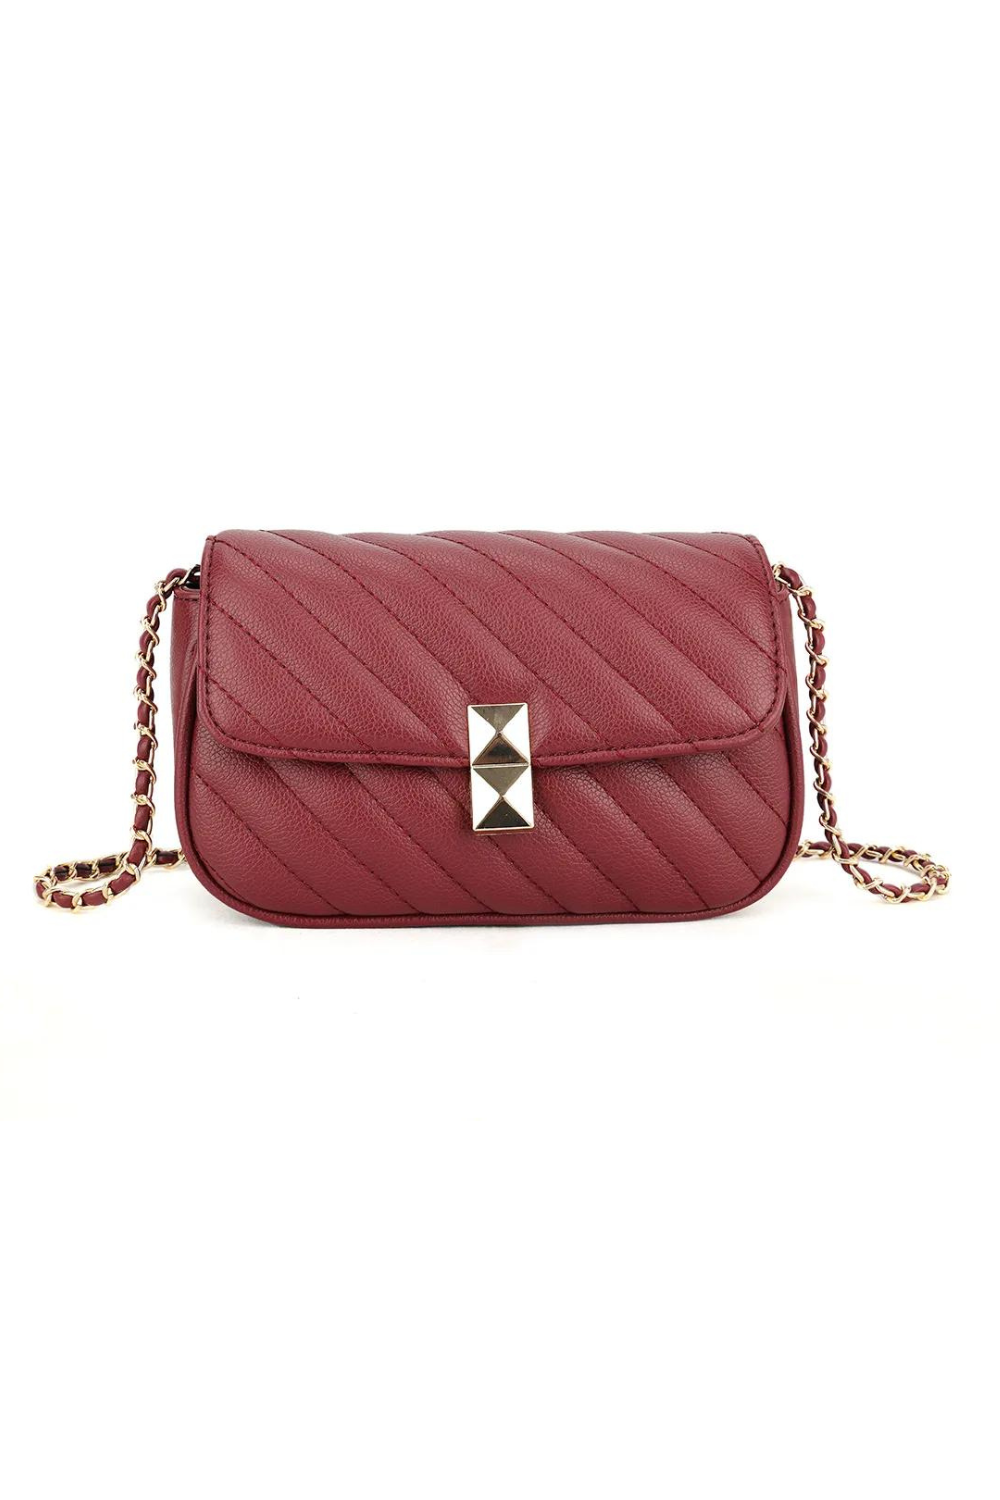 WAVE SHOULDER BAG WITH STITCHING AND CHAIN DETAIL IN BURGUNDY FAUX LEATHER